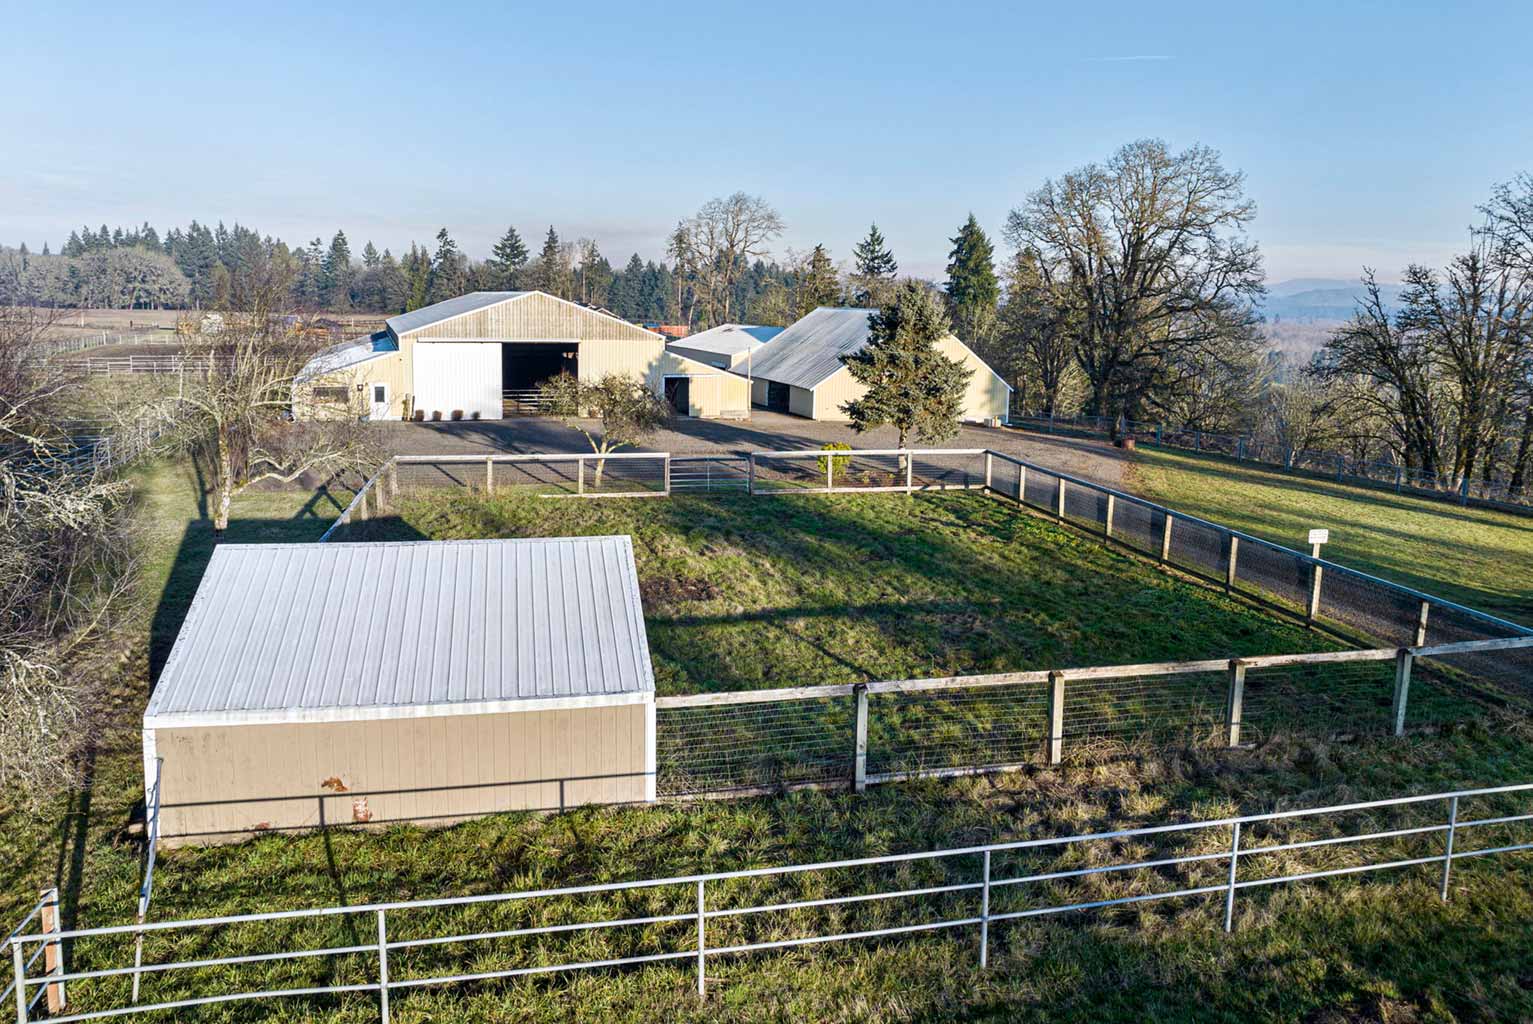 One of the paddocks has been used as a stud pen with loafing shed